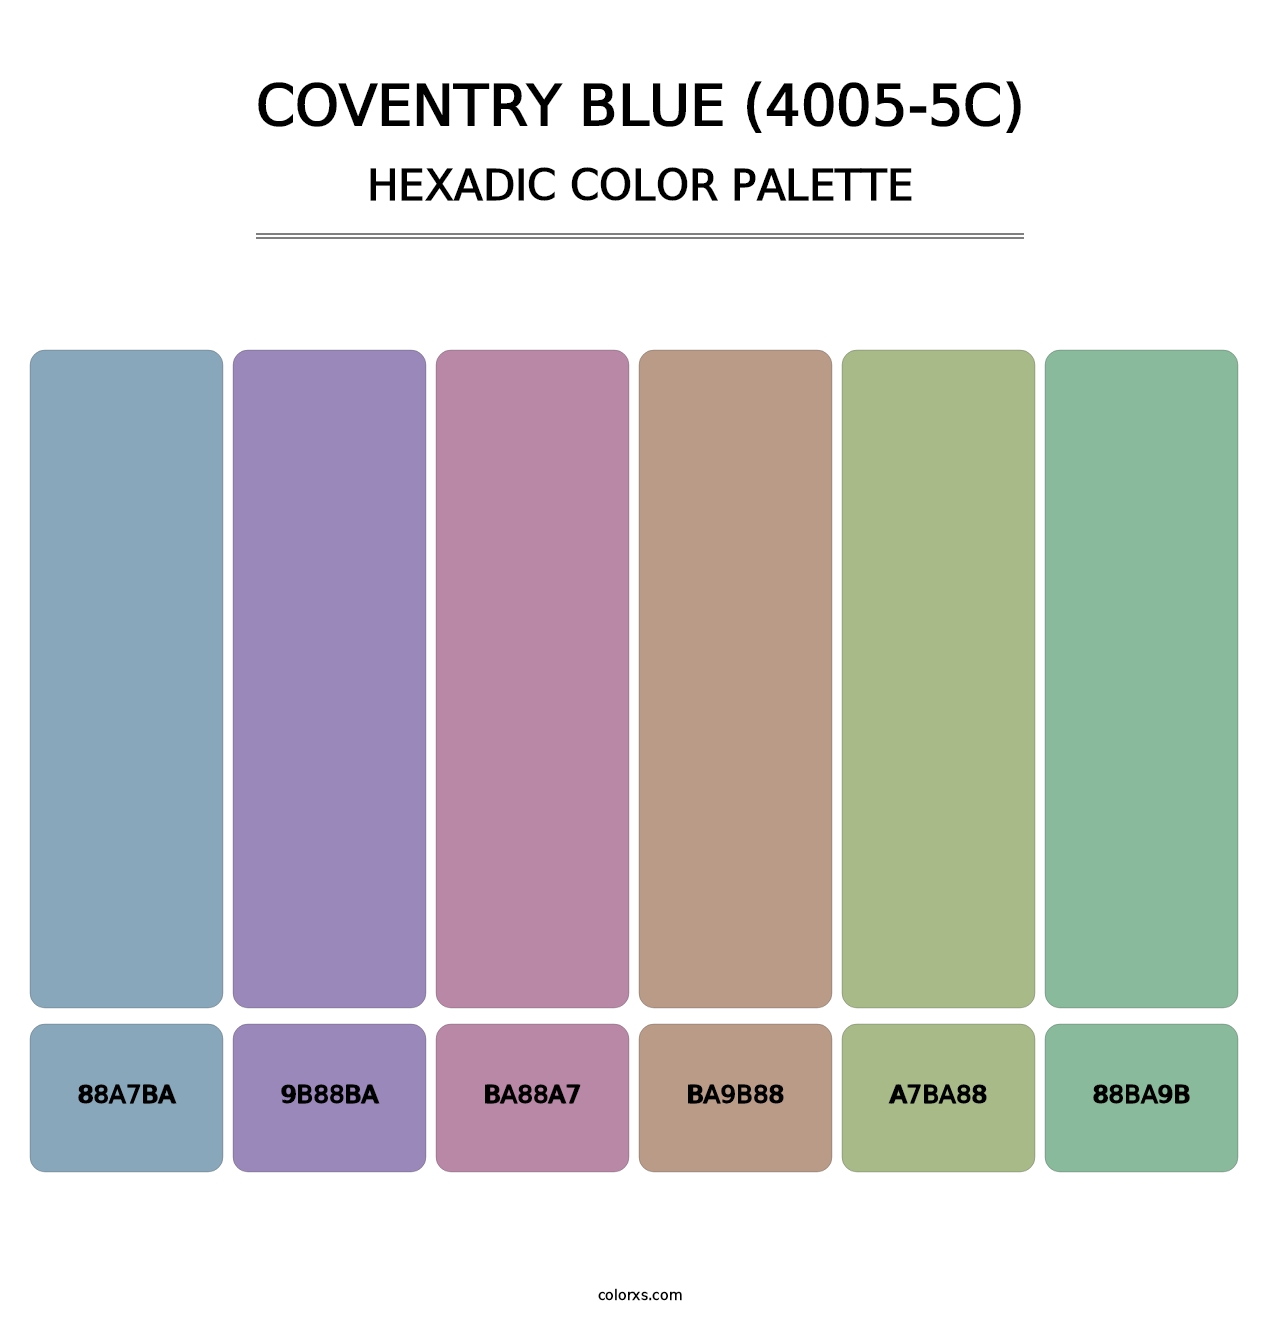 Coventry Blue (4005-5C) - Hexadic Color Palette